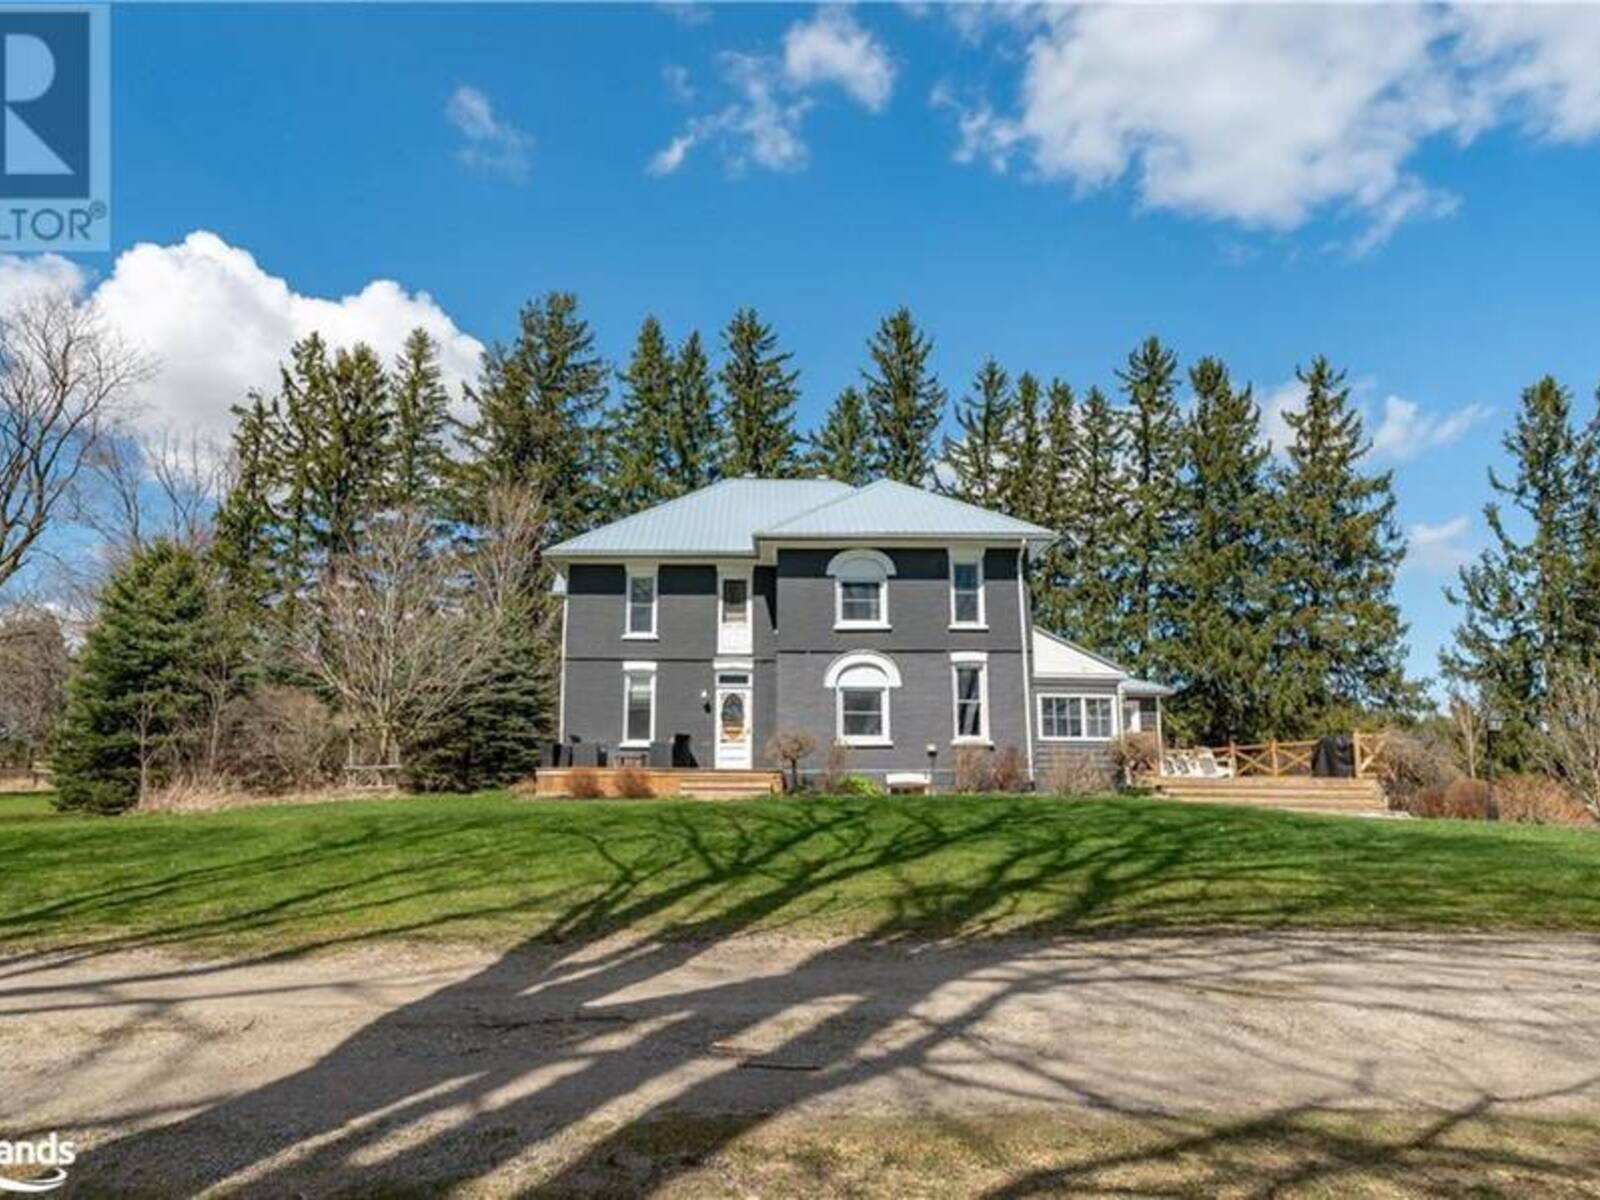 2605 COUNTY 42 Road, Stayner, Ontario L0M 1S0